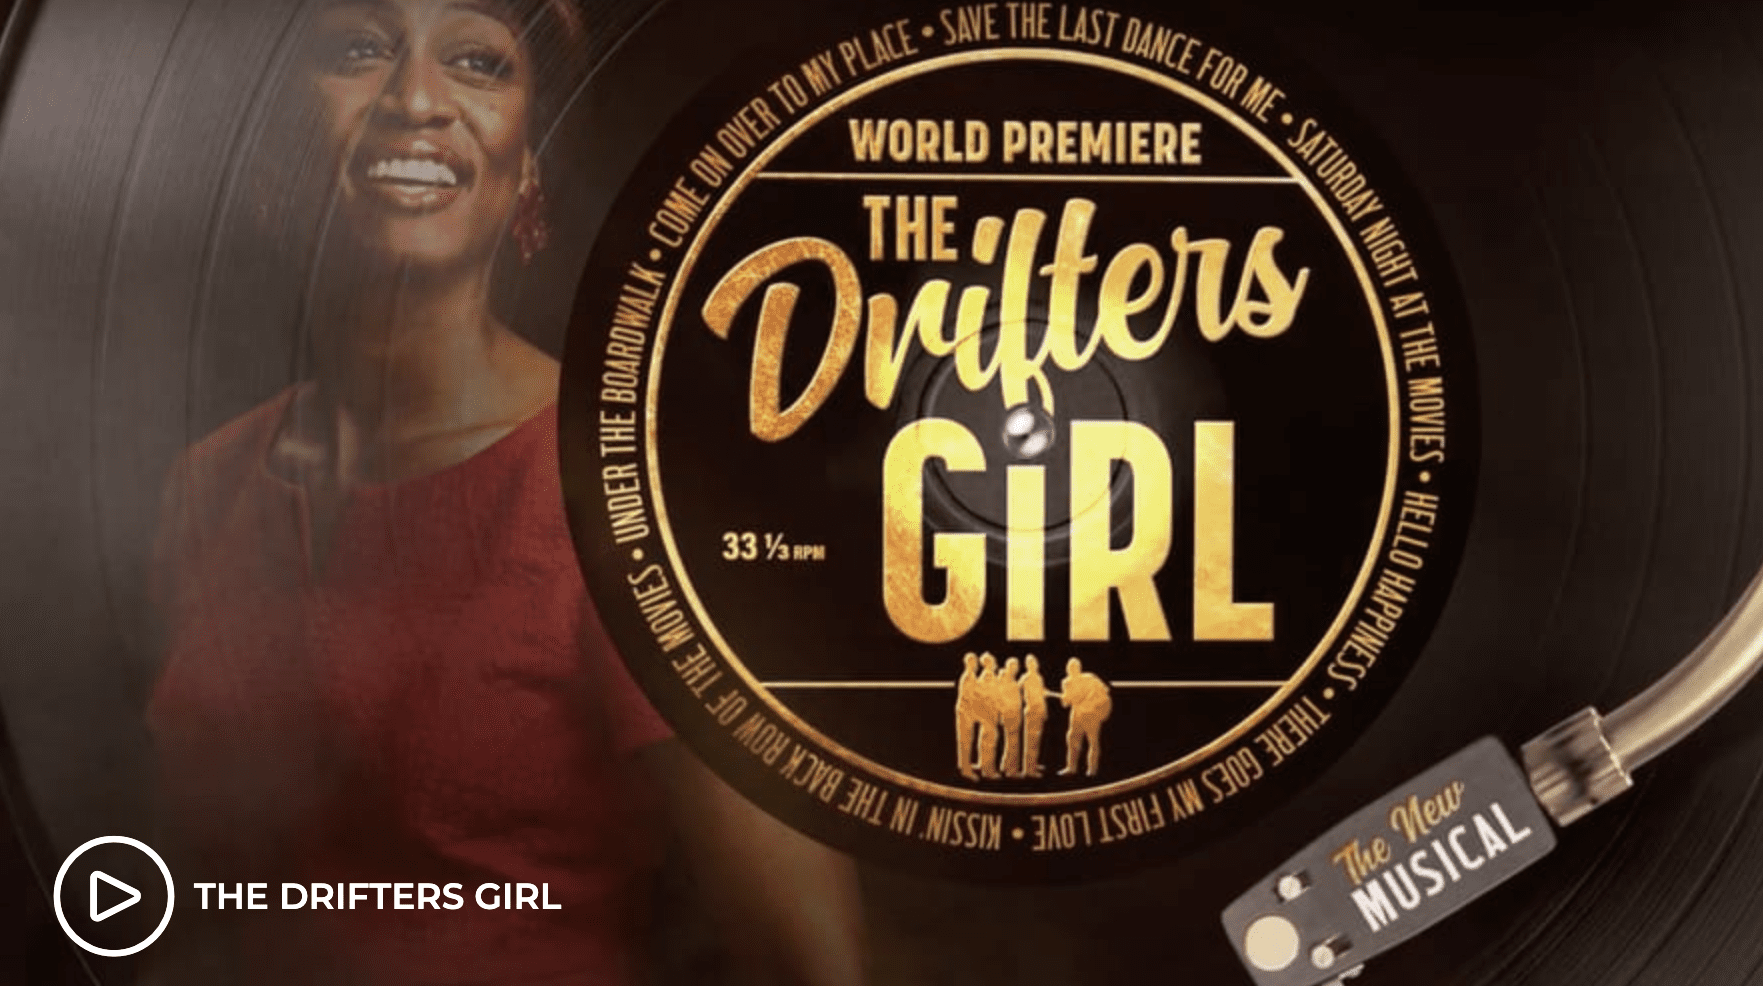 NEWS: Rescheduled dates have been announced for The Drifters Girl starring Beverley Knight